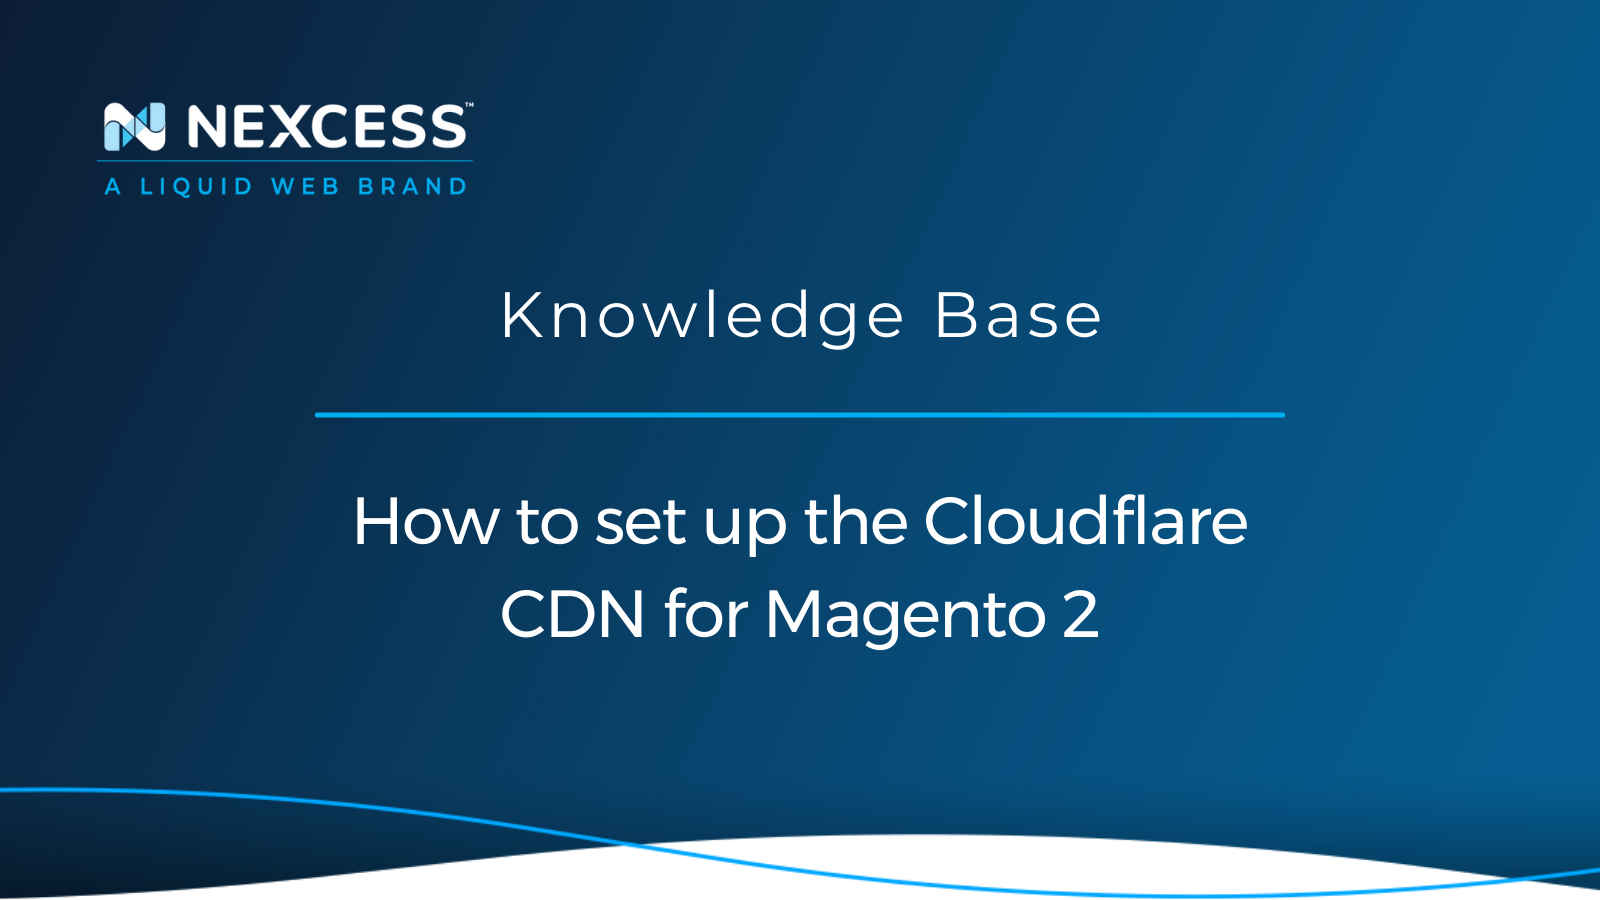 How to set up the Cloudflare CDN for Magento 2